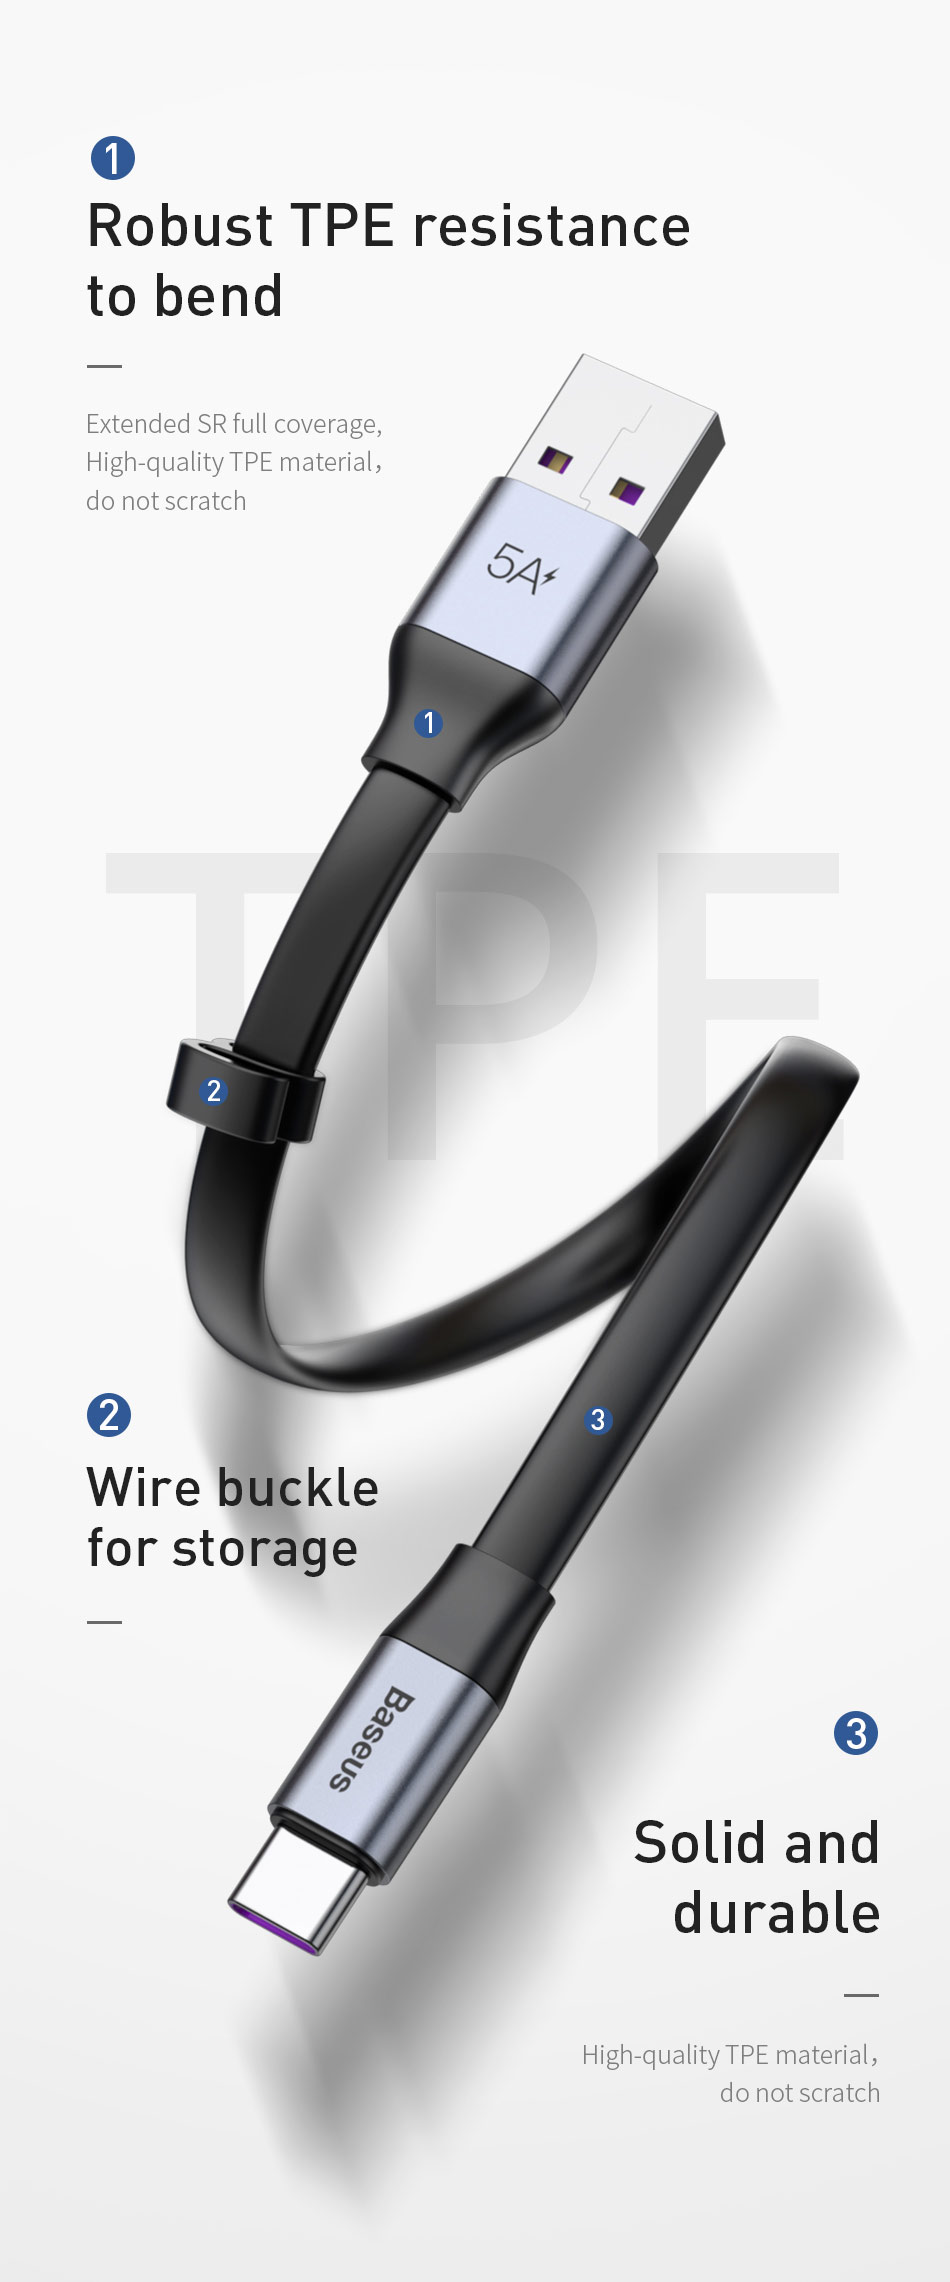 Baseus-40W-5A-23cm-Super-Charge-USB-Type-C-Data-Cable-for-Samsung-S10-8-9-Huawei-P30-Pro-Mate-20-1481258